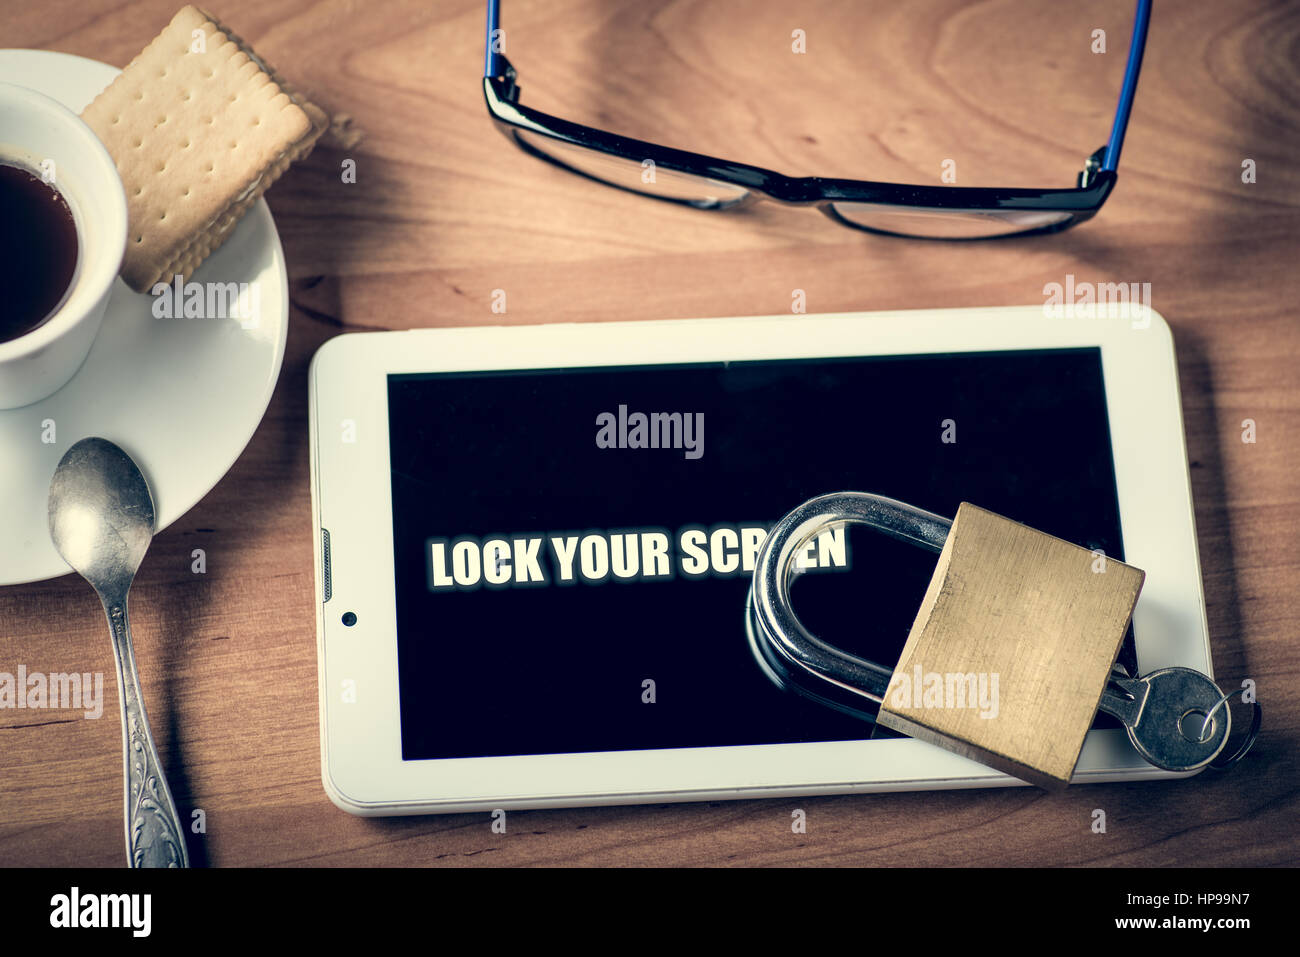 Tablet and padlock on the screen warning to lock you screen Stock Photo